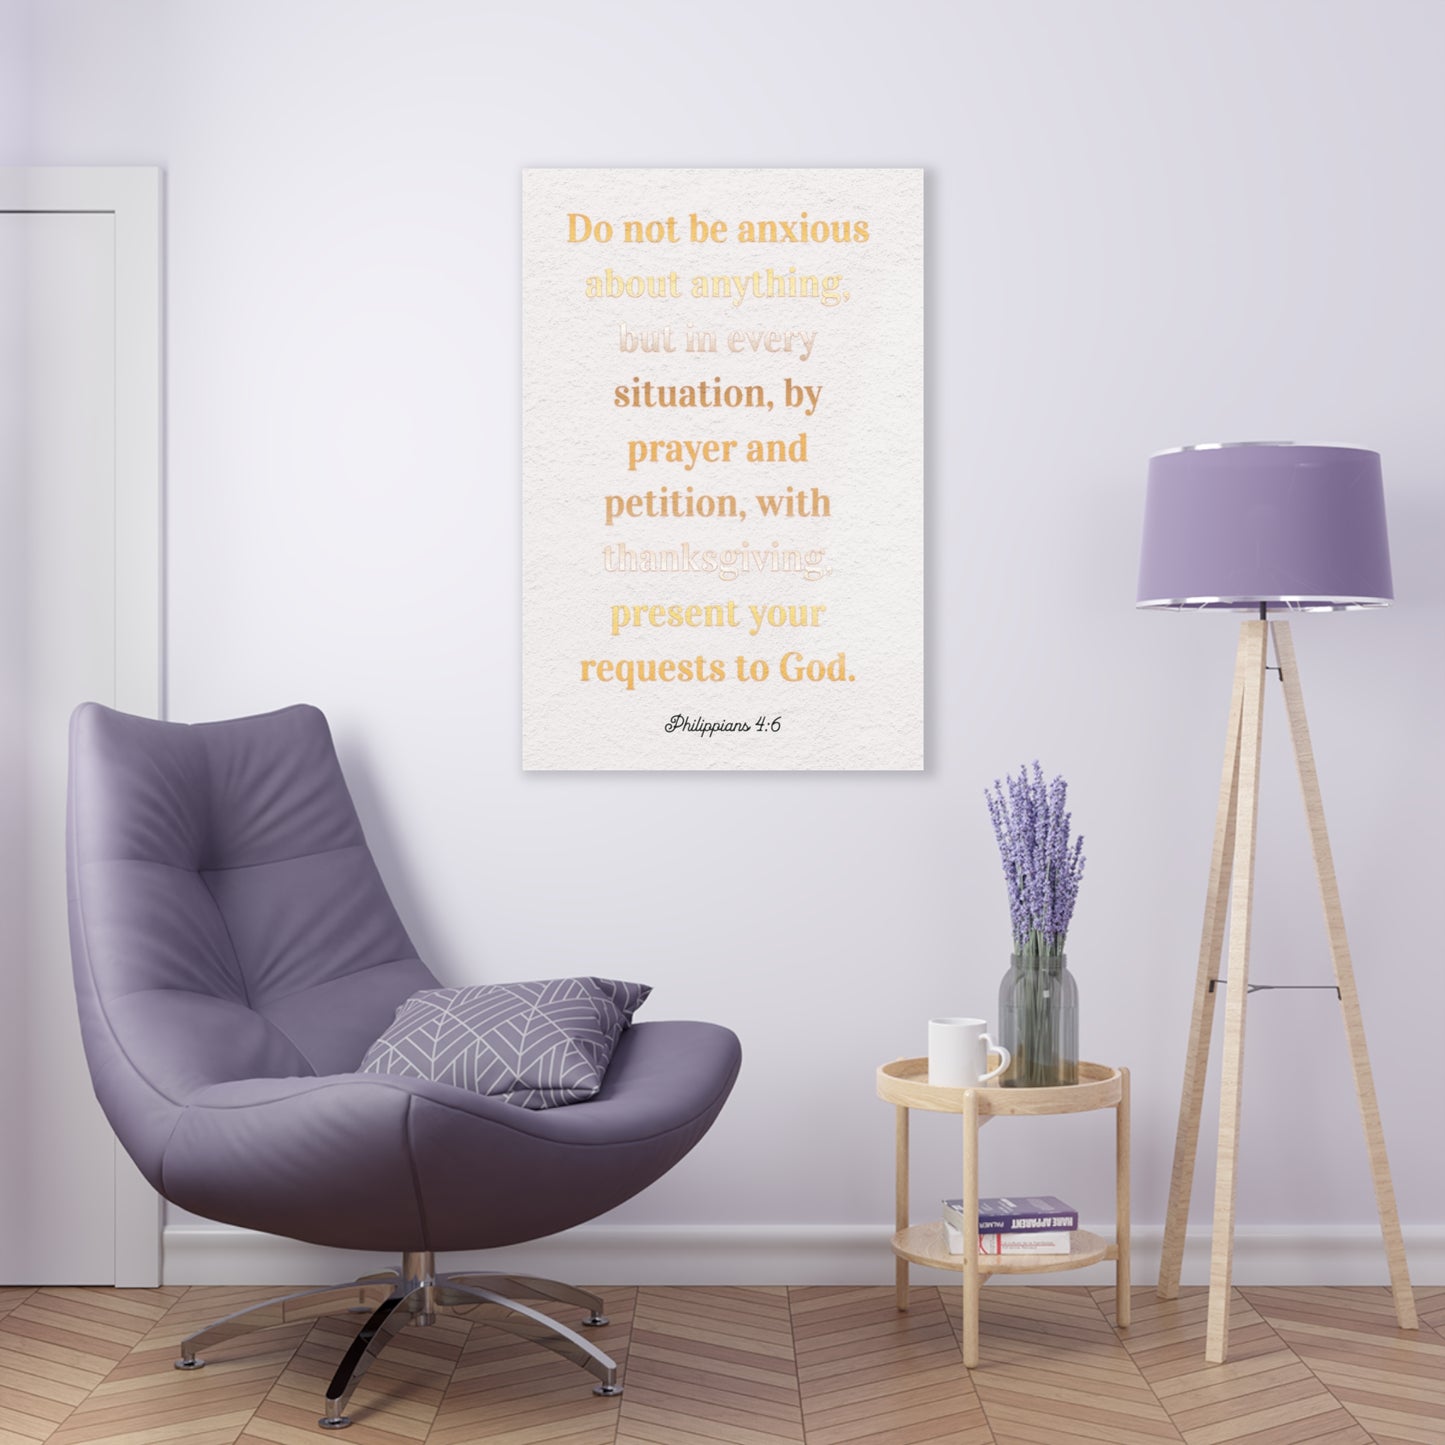 Scripture Quote Wall Art - Acrylic Wall Print with Inspirational Verse | Art & Wall Decor,Assembled in the USA,Assembled in USA,Decor,Home & Living,Home Decor,Indoor,Made in the USA,Made in USA,Poster